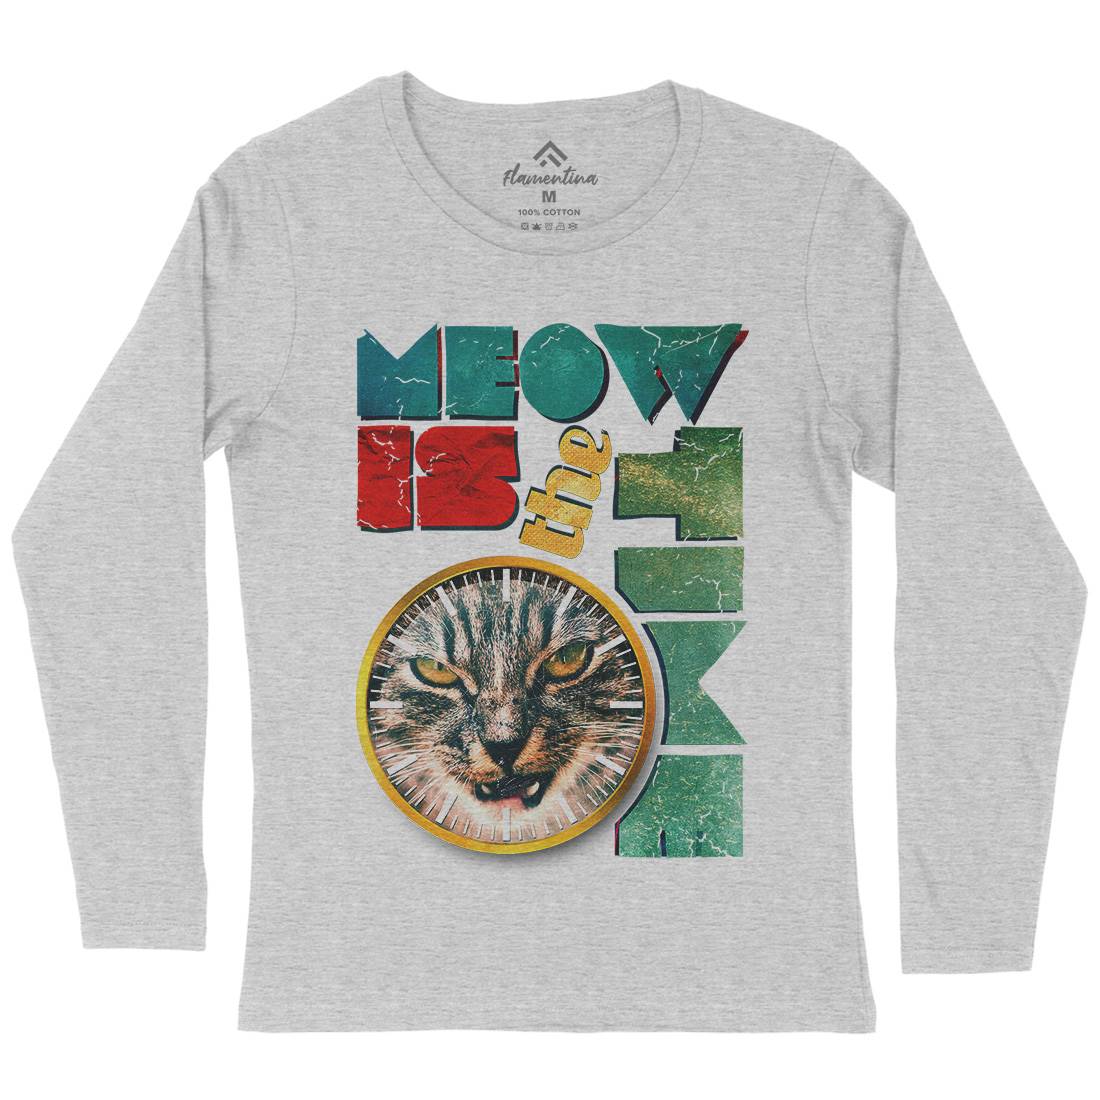 Meow Is The Time Womens Long Sleeve T-Shirt Animals A876